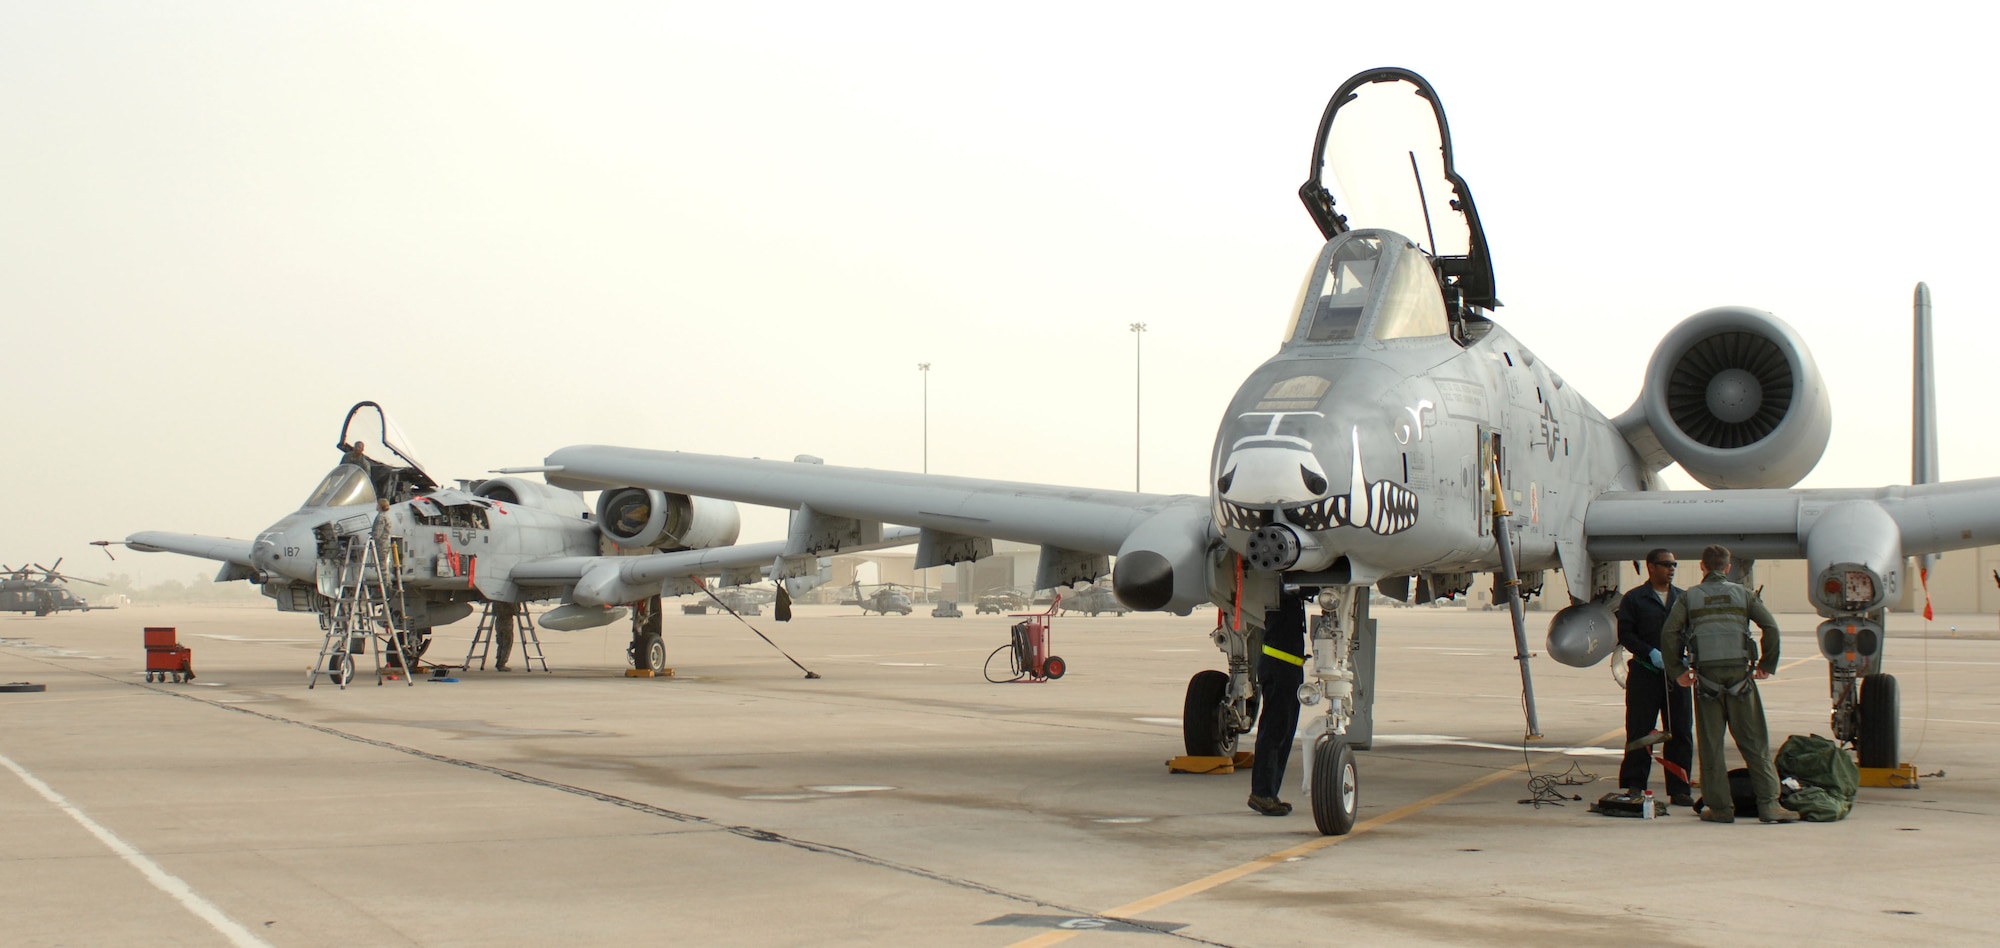 An A-10C Thunderbolt II from the 917th Fighter Group at Barksdale Air Force Base, La. joins the 355th Fighter Wing at Davis-Monthan AFB, Ariz., April 9, 2013. The A-10 will be stationed at D-M as part of the 355th FW. (U.S. Air Force photo by Airman 1st Class Betty R. Chevalier/released)